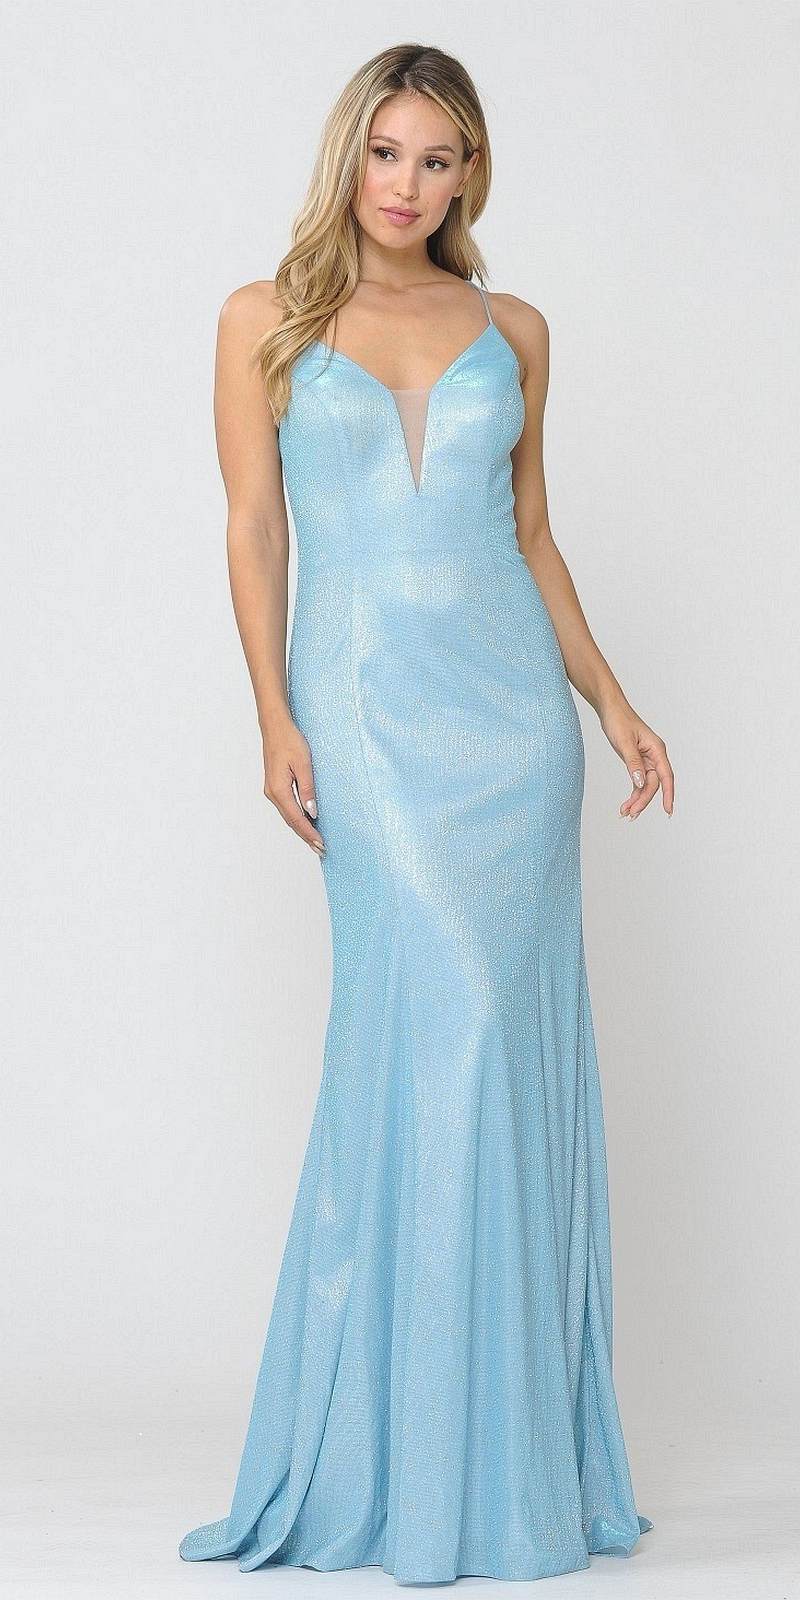 Poly USA 8668 Blue Mermaid Style Long Prom Dress with Spaghetti Straps